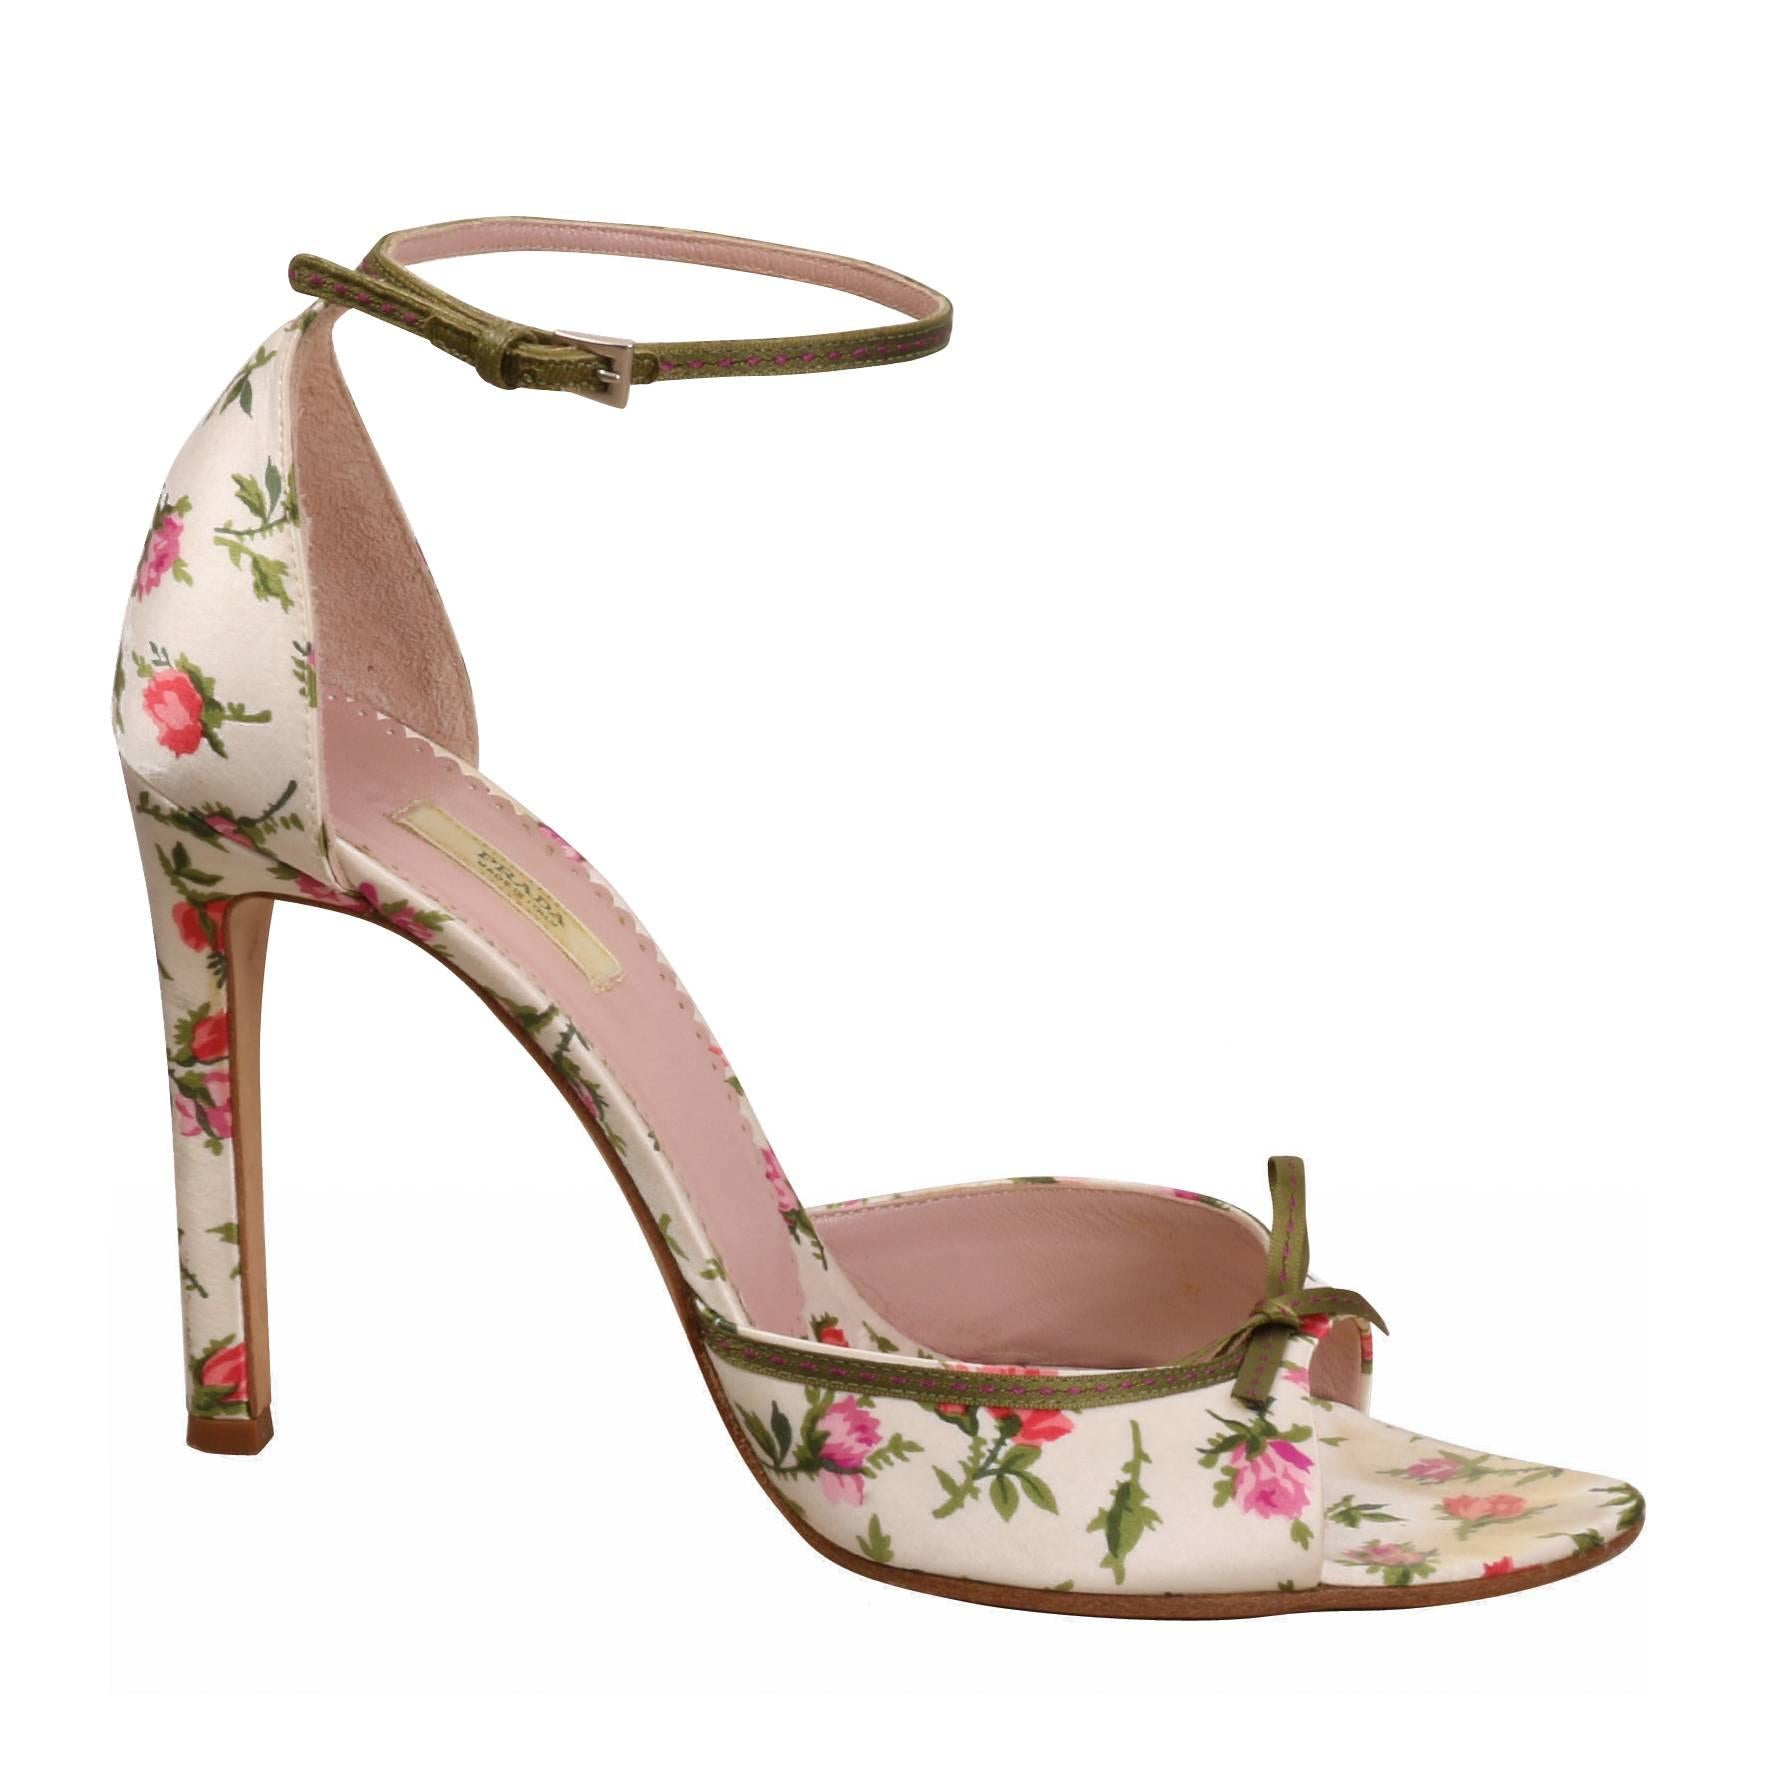  Prada Ivory Satin with Pink and Red Roses High Heel Sandals For Sale